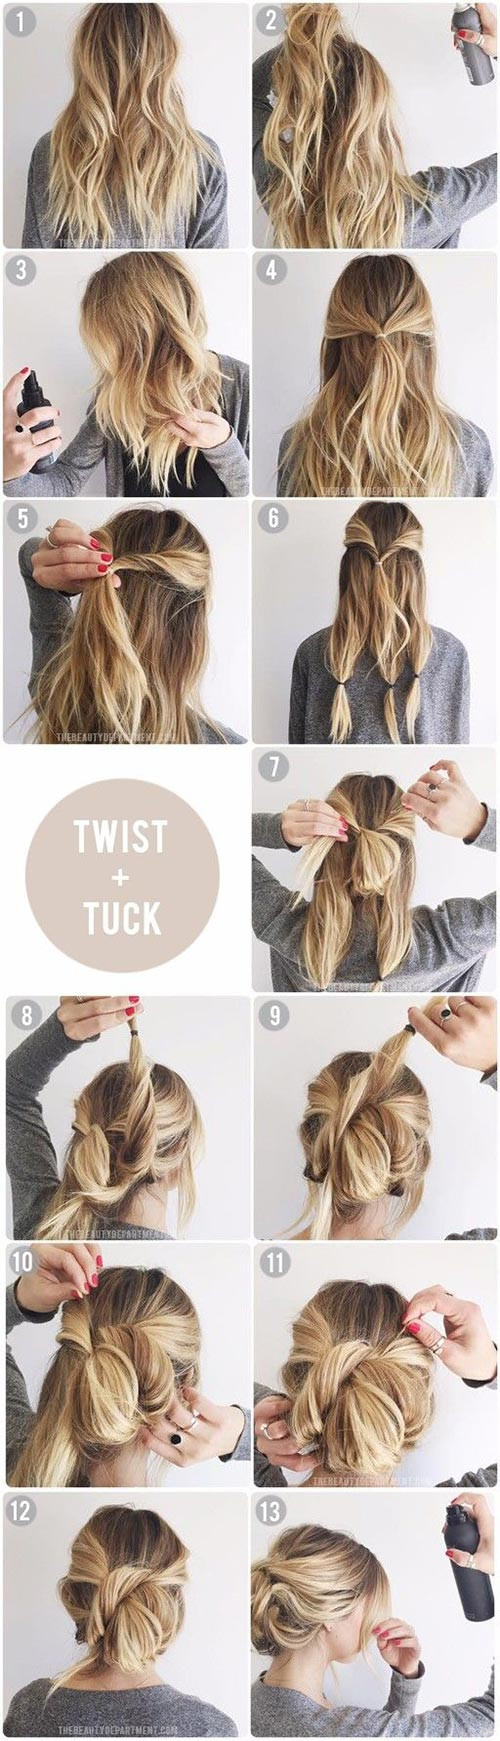 Medium Hairstyles Tutorials
 Top 10 Messy Updo Tutorials For Different Hair Lengths